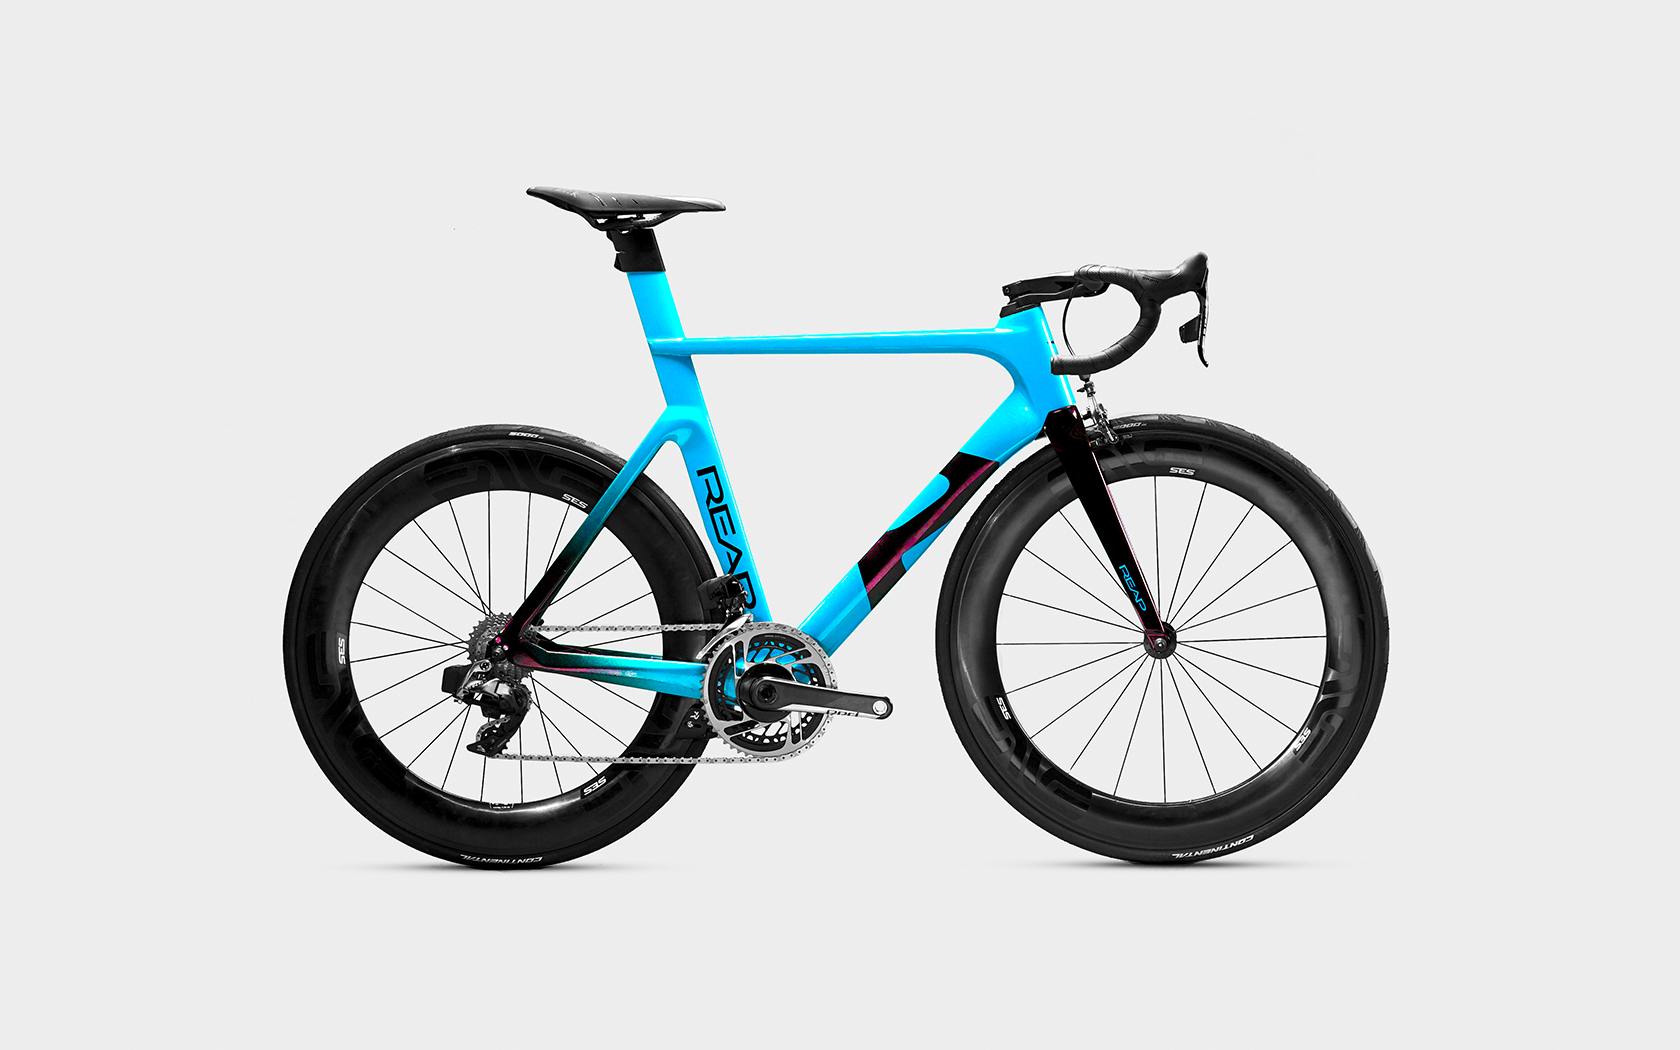 The Vekta aero-road bike is made using a specific lay-up process and 80% ultra-high modulus unidirectional carbon fiber.